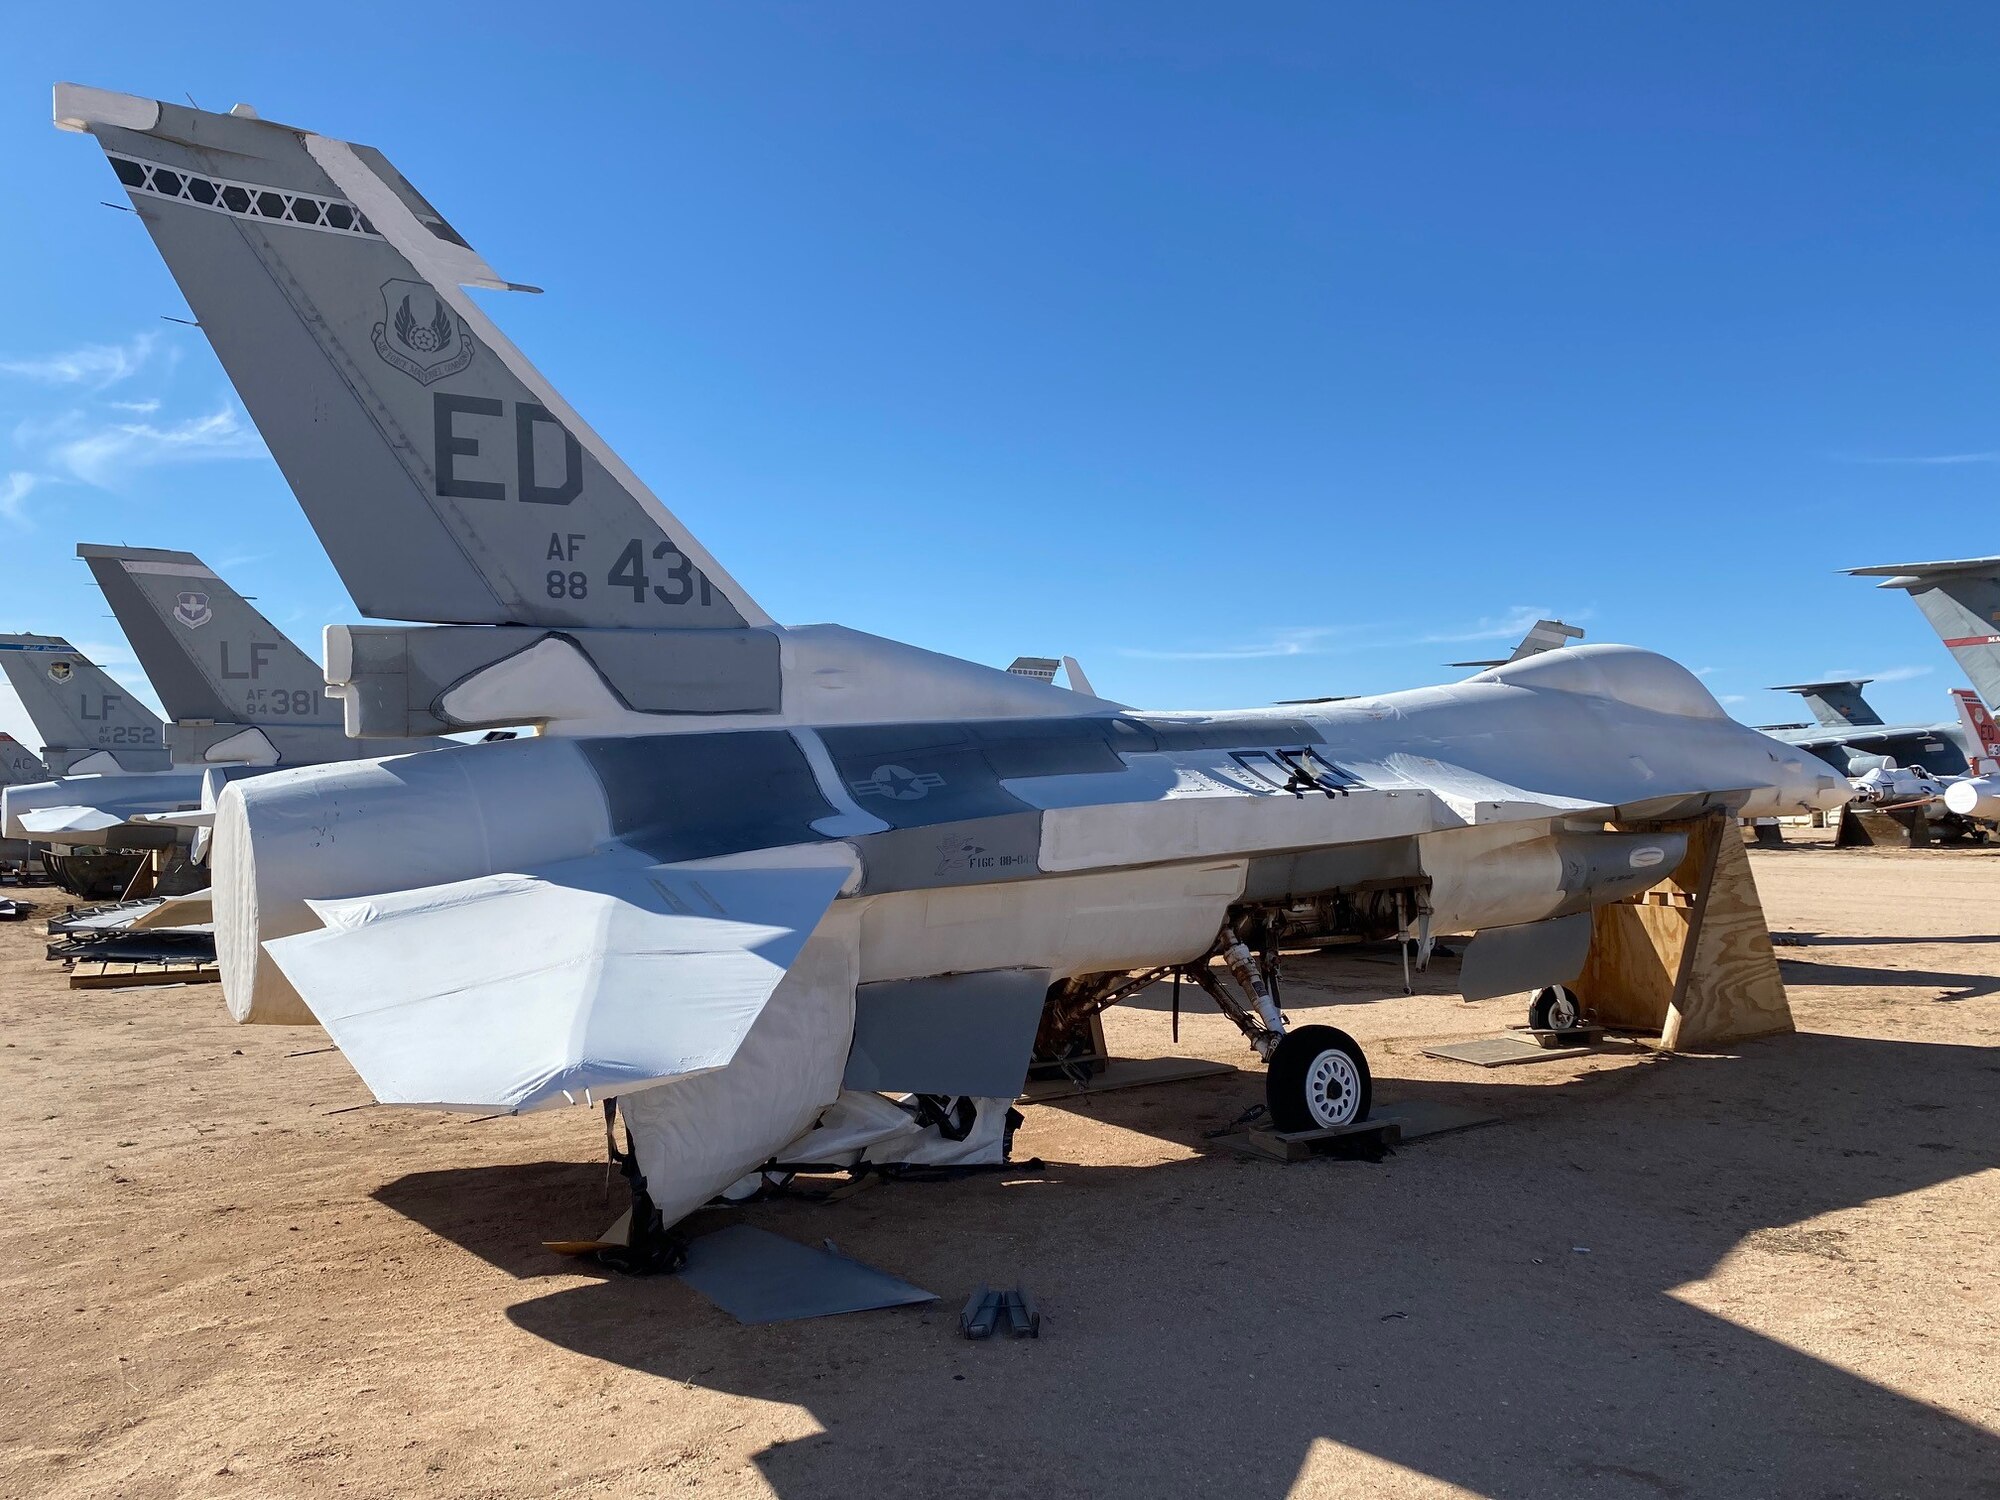 An F-16 Fighting Falcon in storage at the 309th Aerospace Maintenance and Regeneration Group (AMARG) at Davis-Monthan Air Force Base. The aircraft is one of two that will be used to create a digital replica of the fighter. (Courtesy photo)